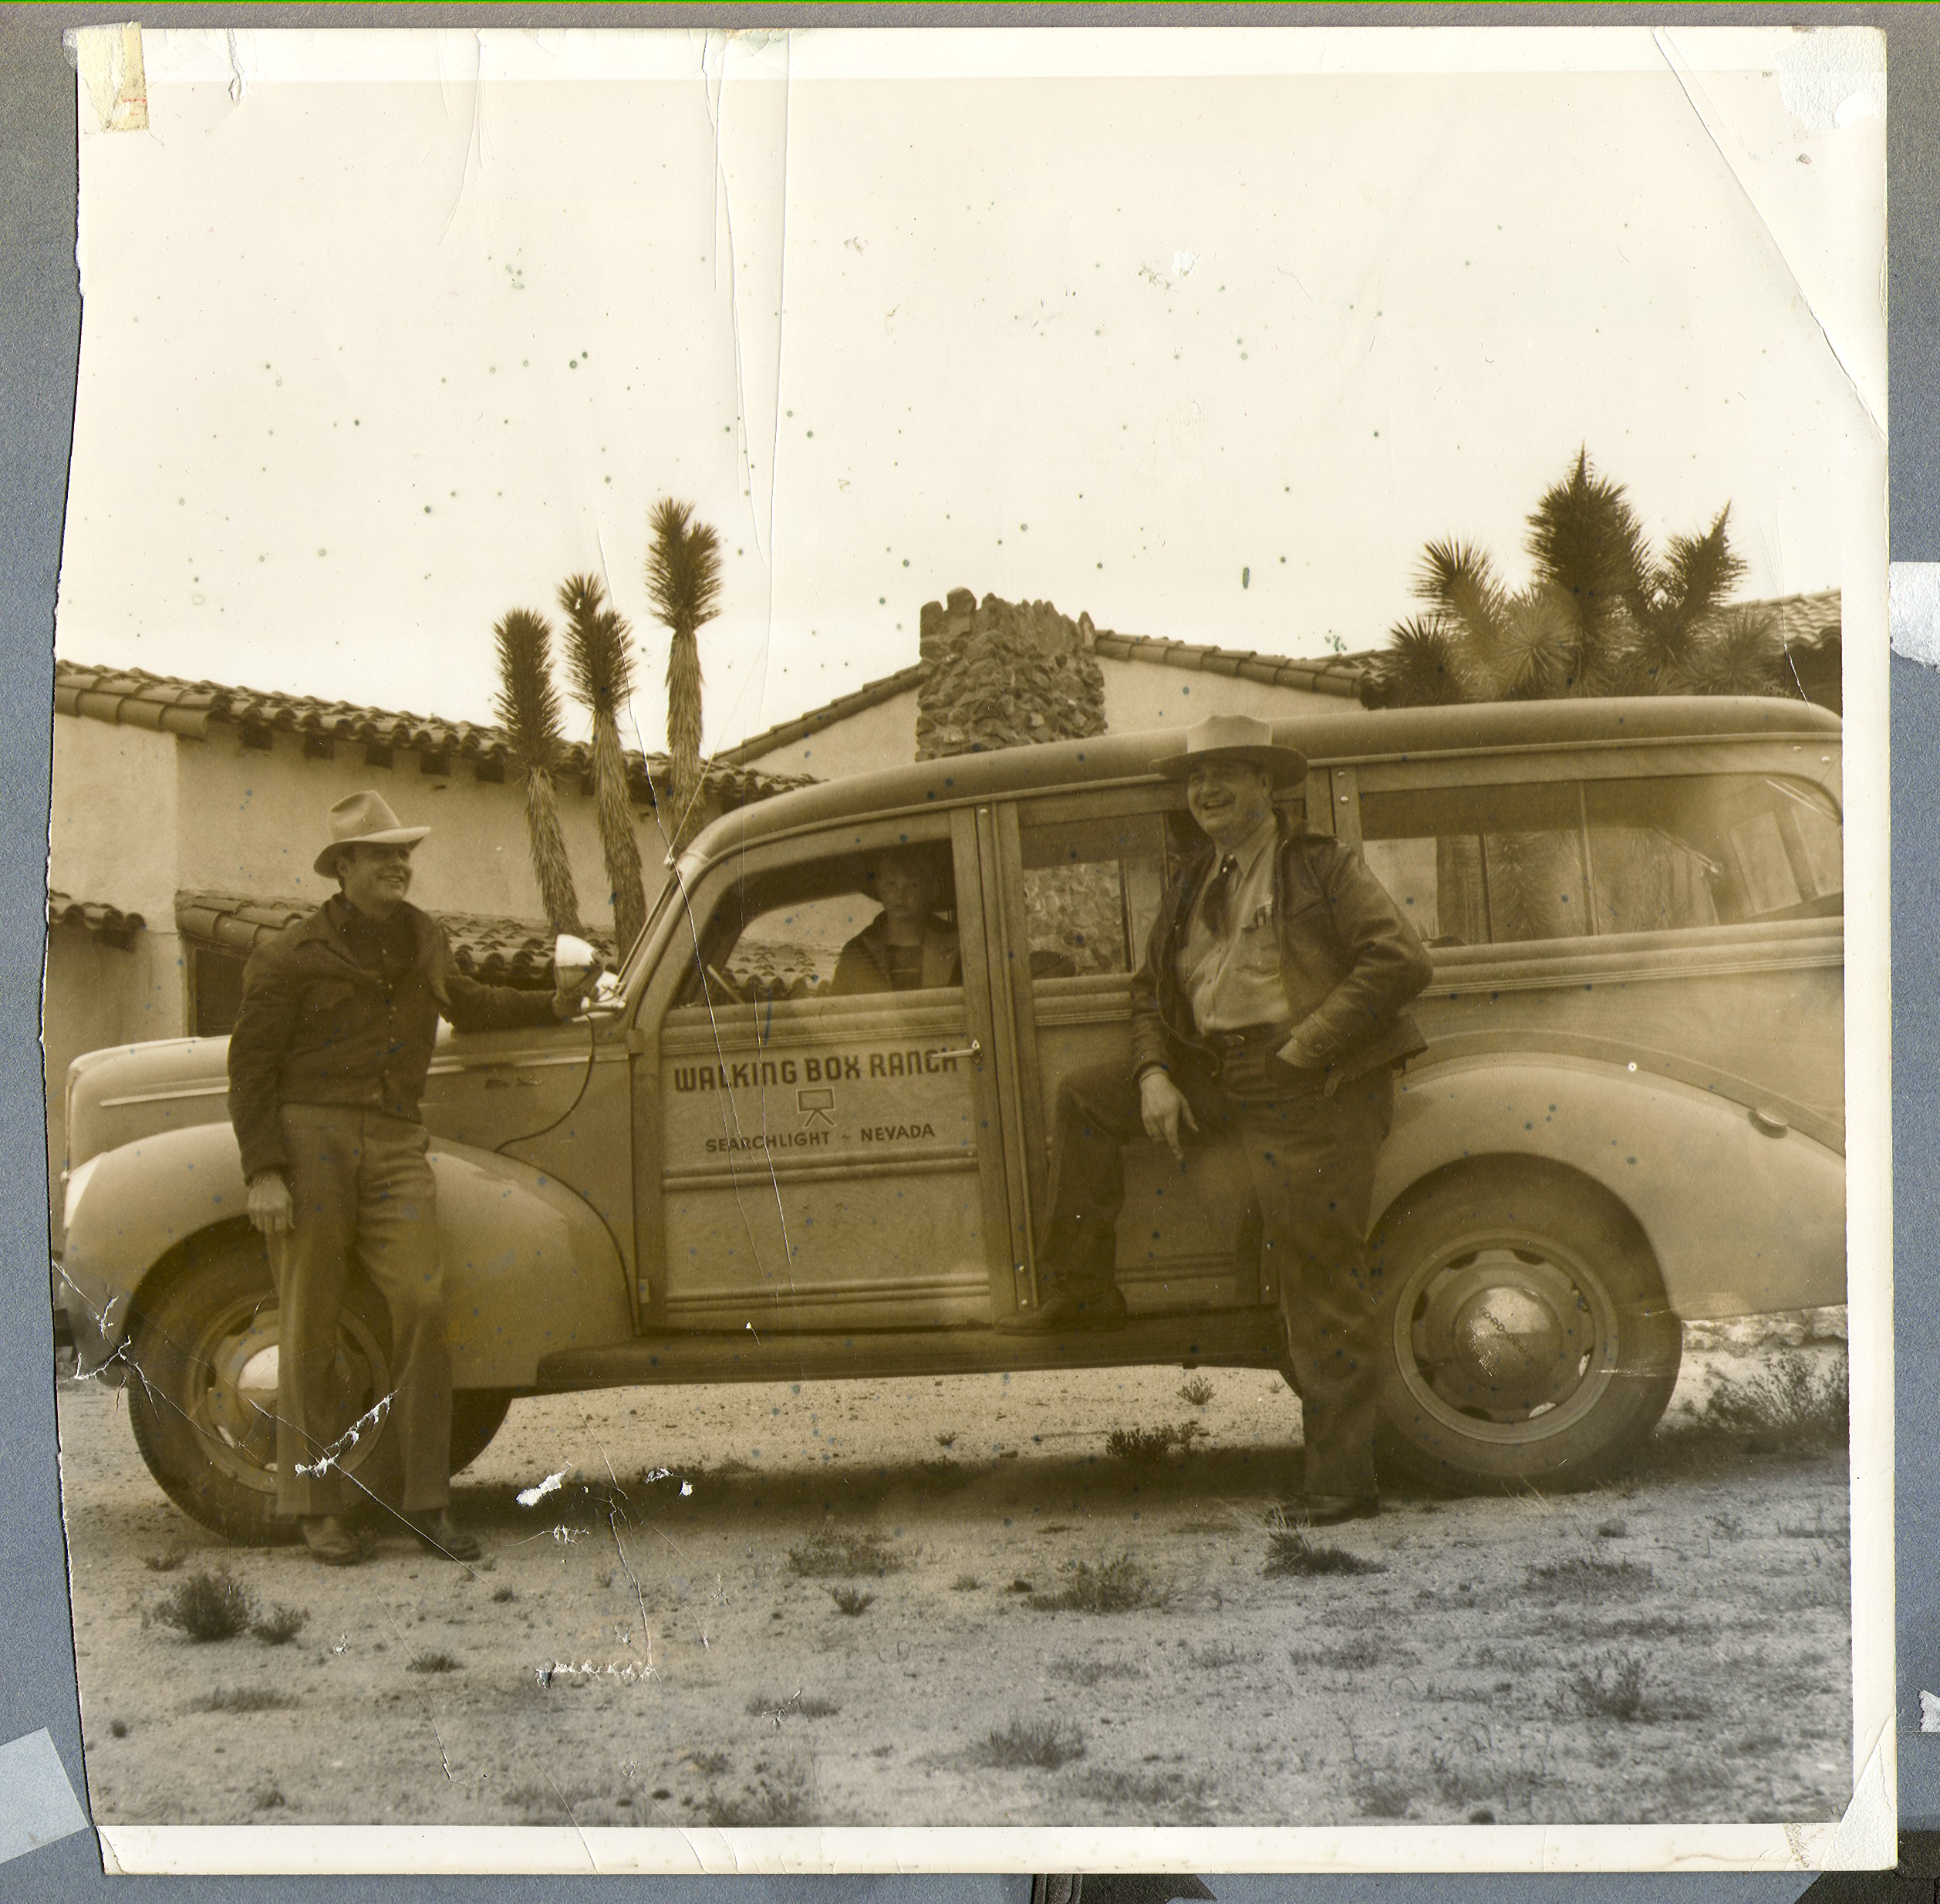 Vehicle with Walking Box Ranch, Searchlight, (Nev.) on the side. Rex Bell (left), Bill Froelich (right), and Rex Anthony Bell, Jr in the car: photographic print